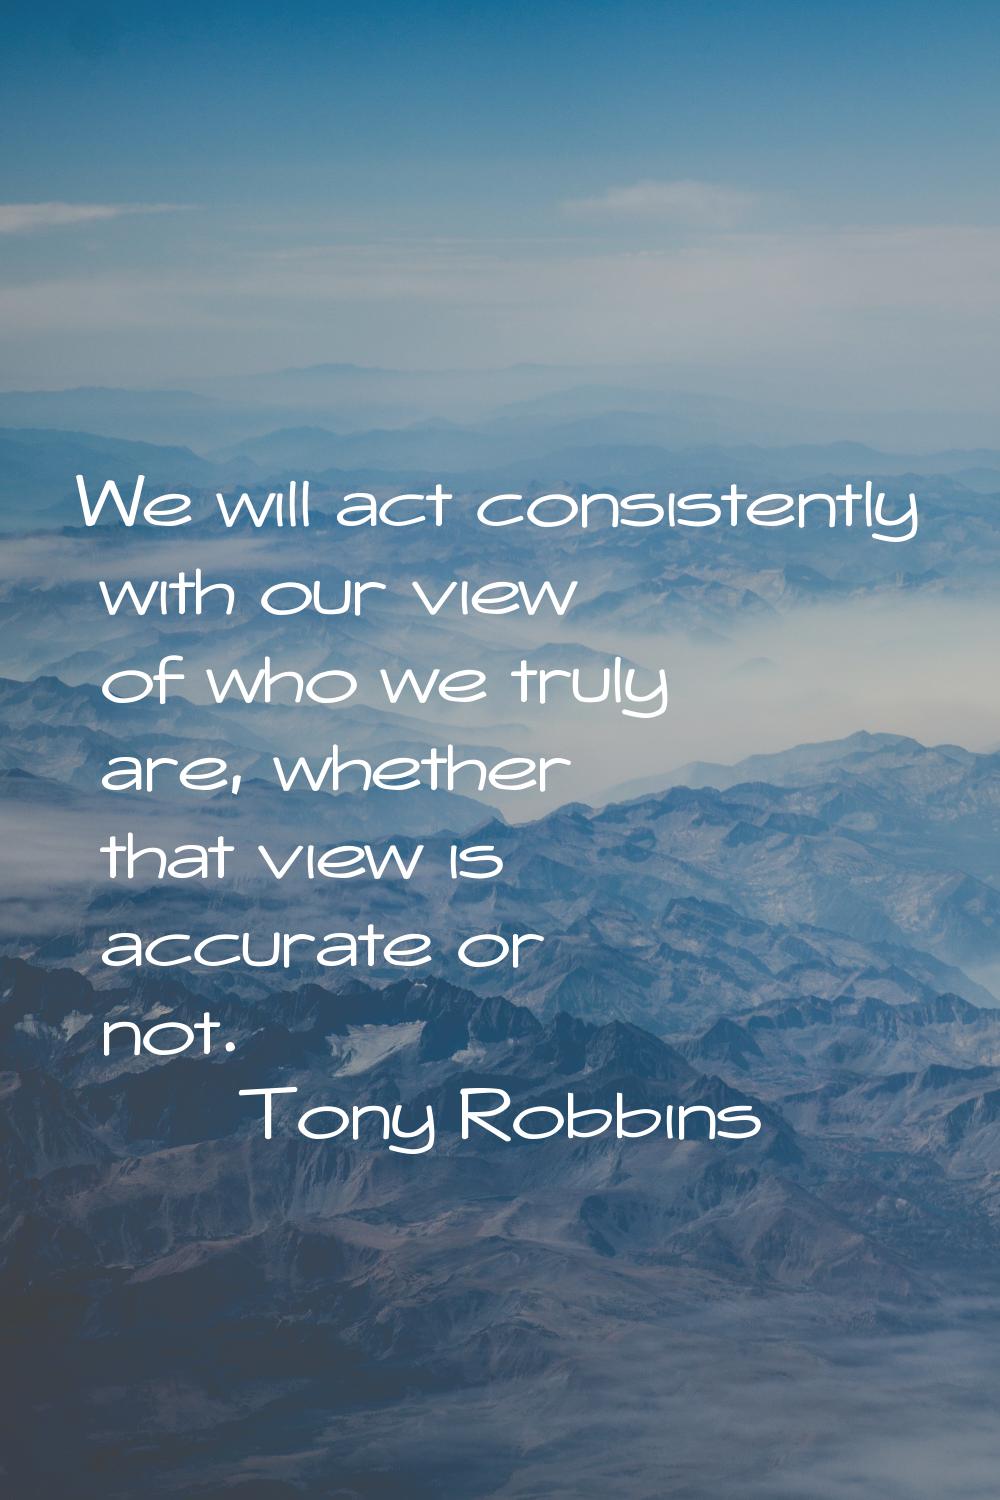 We will act consistently with our view of who we truly are, whether that view is accurate or not.